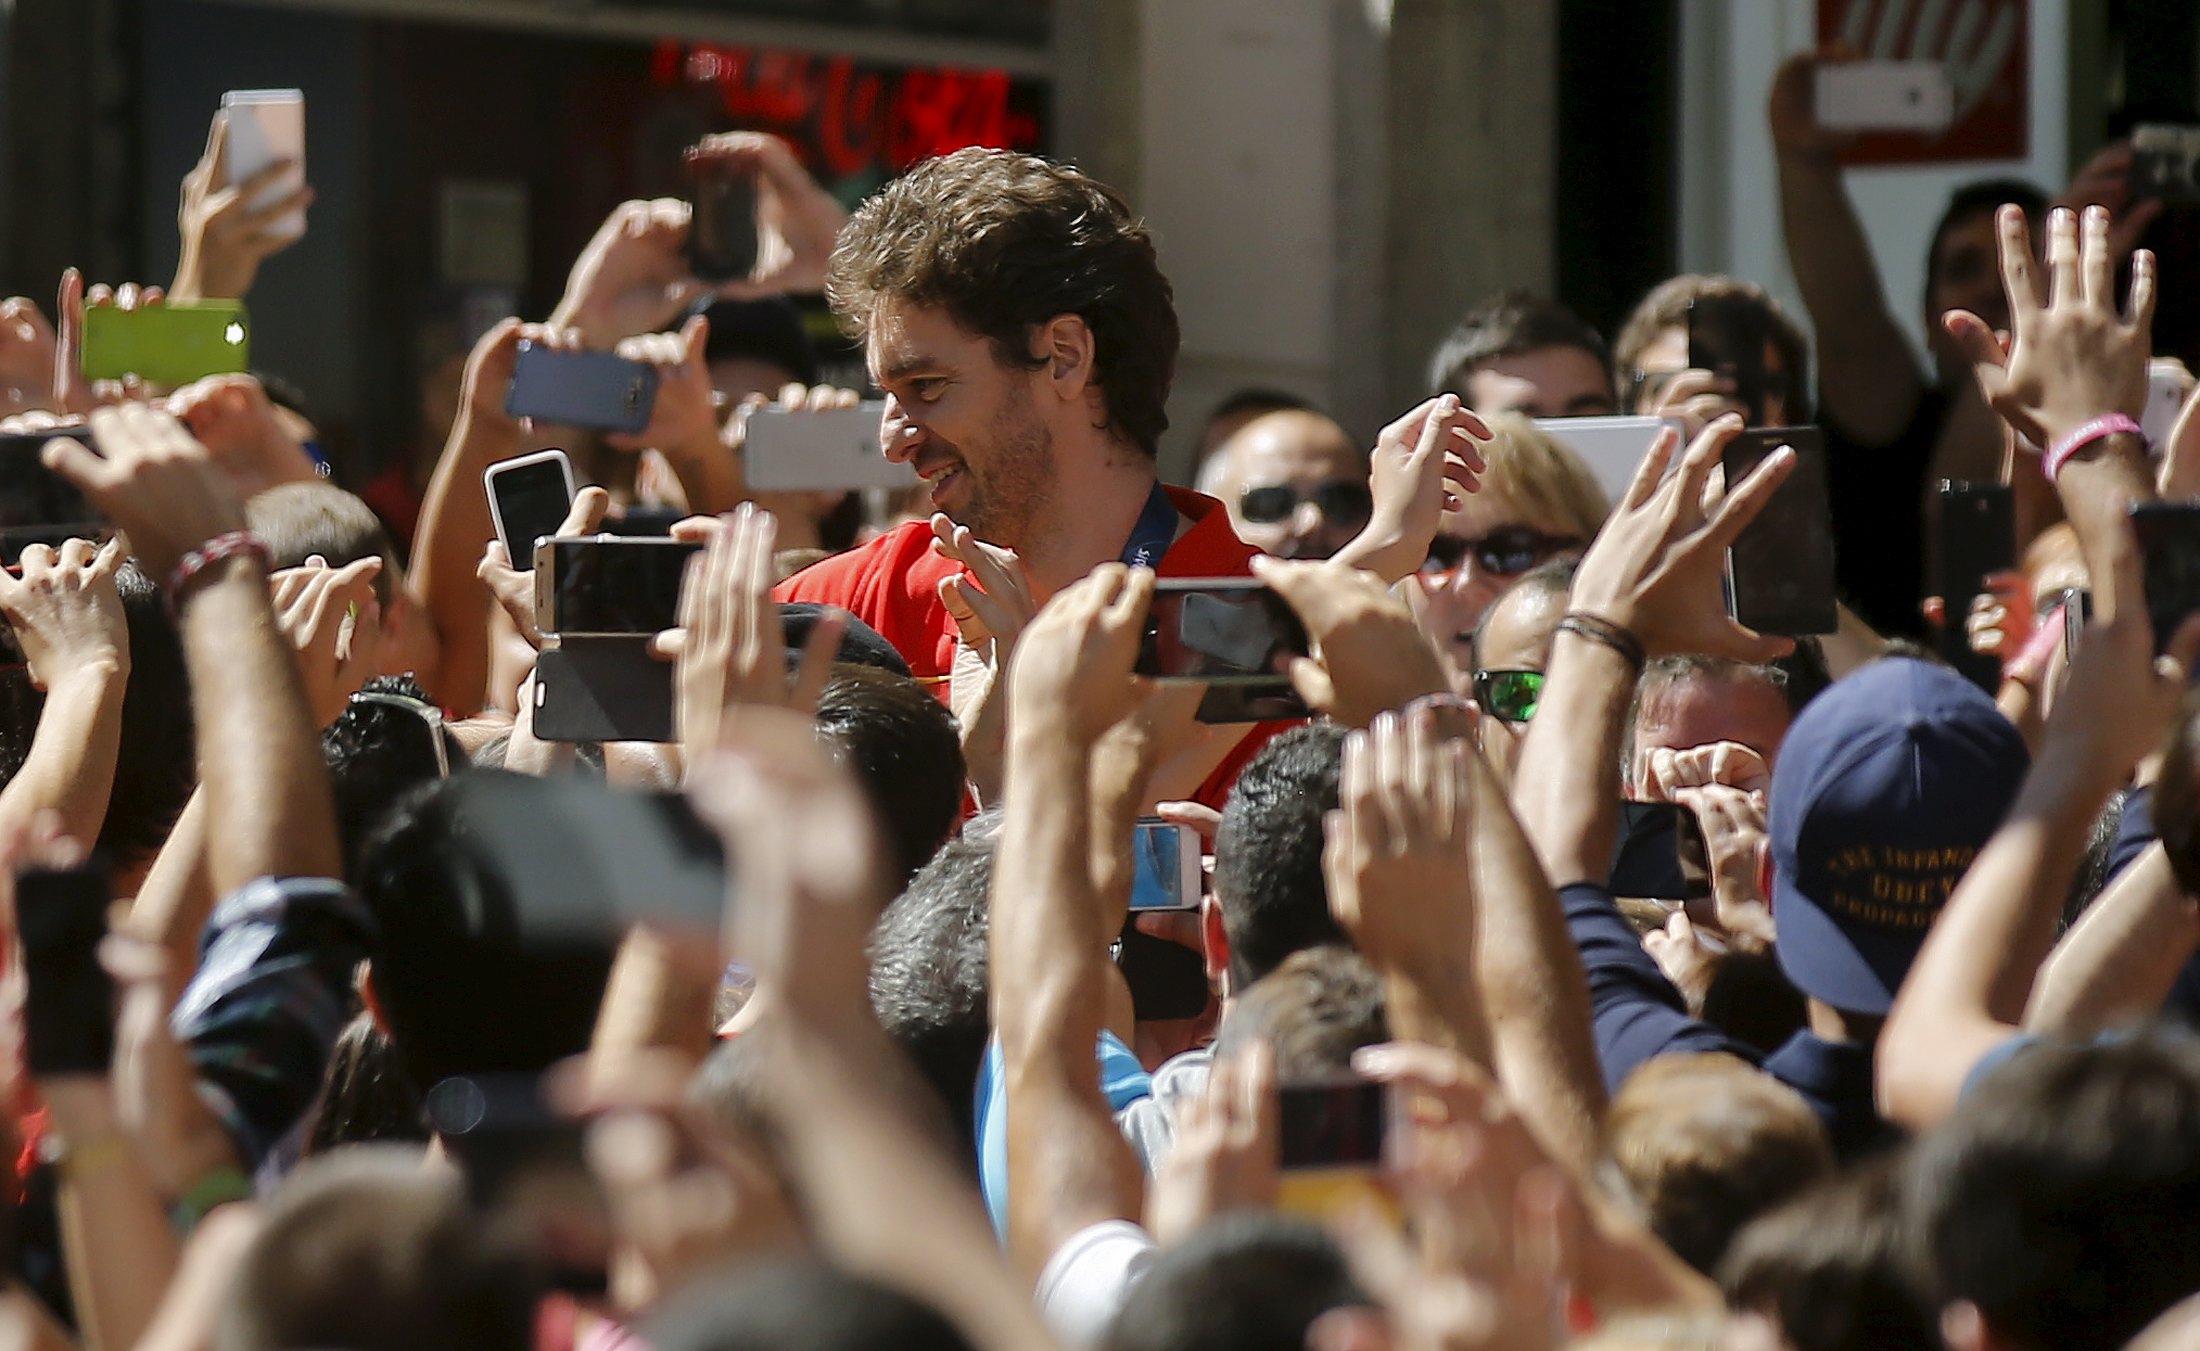 Spain's basketball player Pau Gasol walks through a crowd holding mobile phones after his arrival for a celebration with fans the day after winning their EuroBasket 2015 final, during a ceremony in central Madrid, Spain, September 21, 2015. REUTERS/Andrea Comas